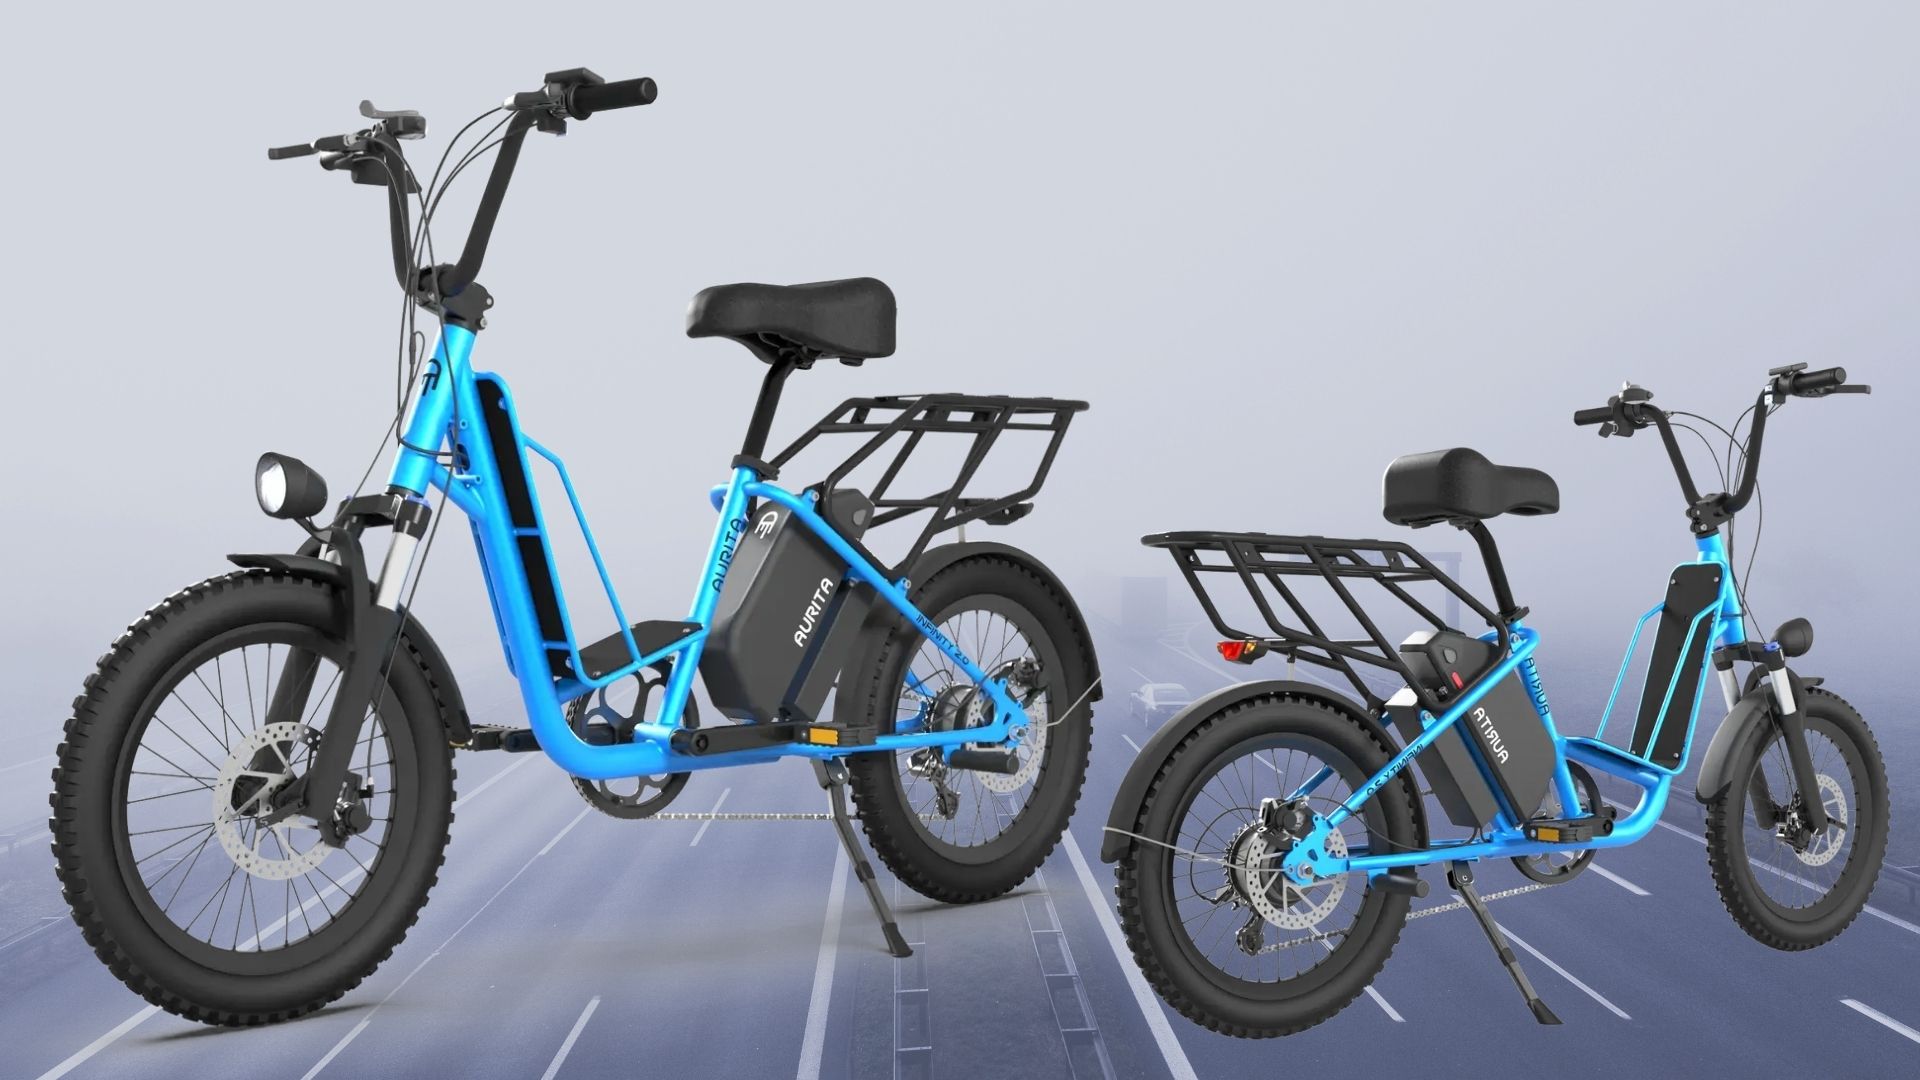 https://e-vehicleinfo.com/hindi/aurita-infinity-electric-cycle-price-features-and-specs/